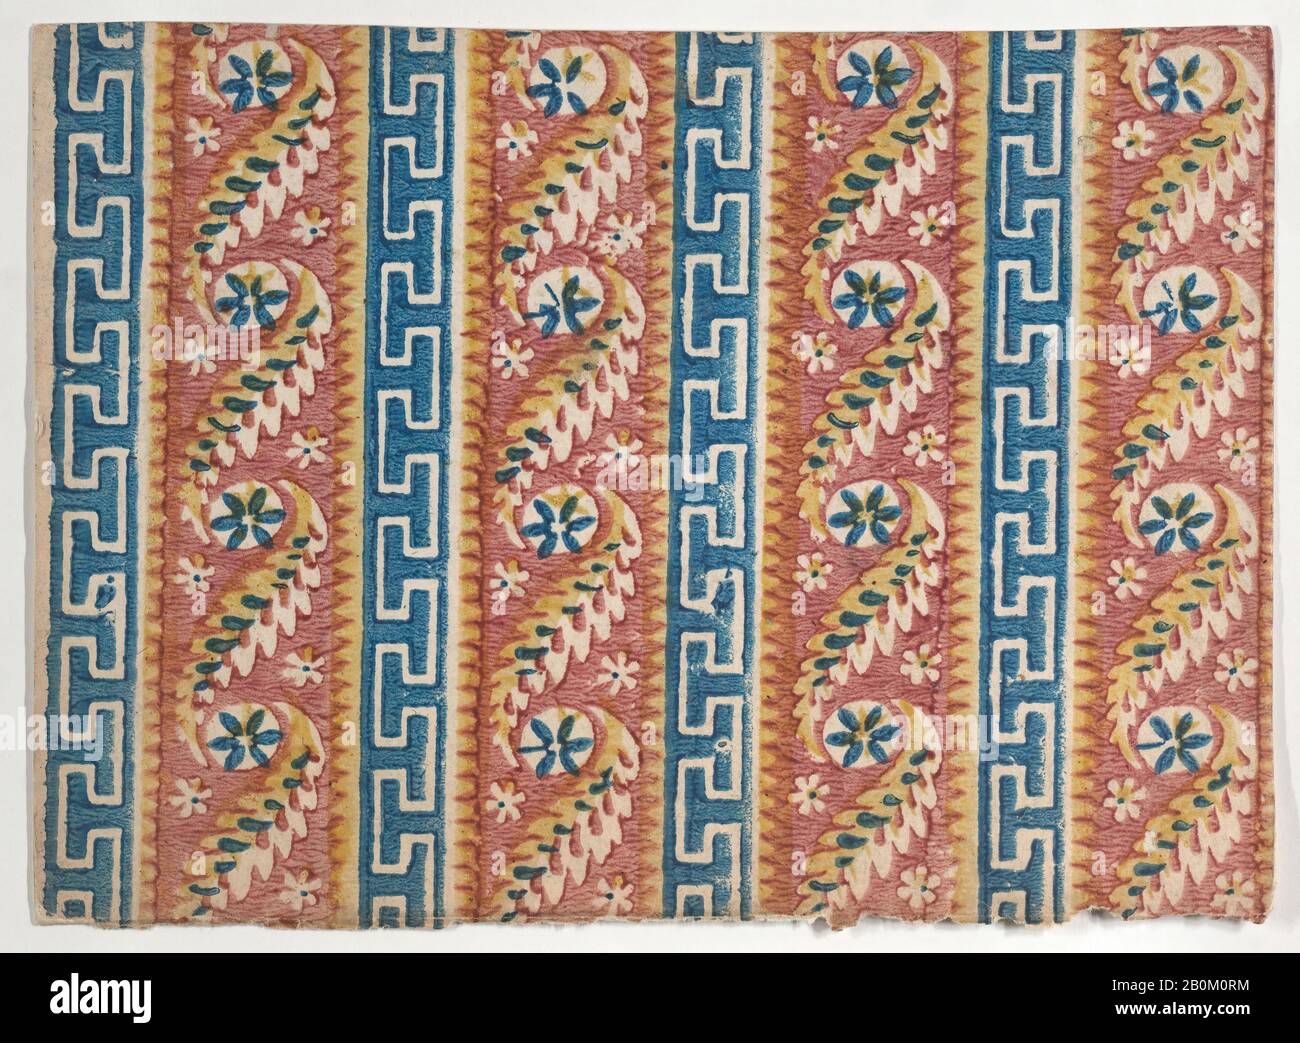 Anonymous, Sheet with Greek key and paisley pattern, Anonymous, Italian, 18th century, 18th century, Relief print (wood or metal), Sheet: 5 7/8 × 8 1/4 in. (15 × 21 cm), Prints Stock Photo